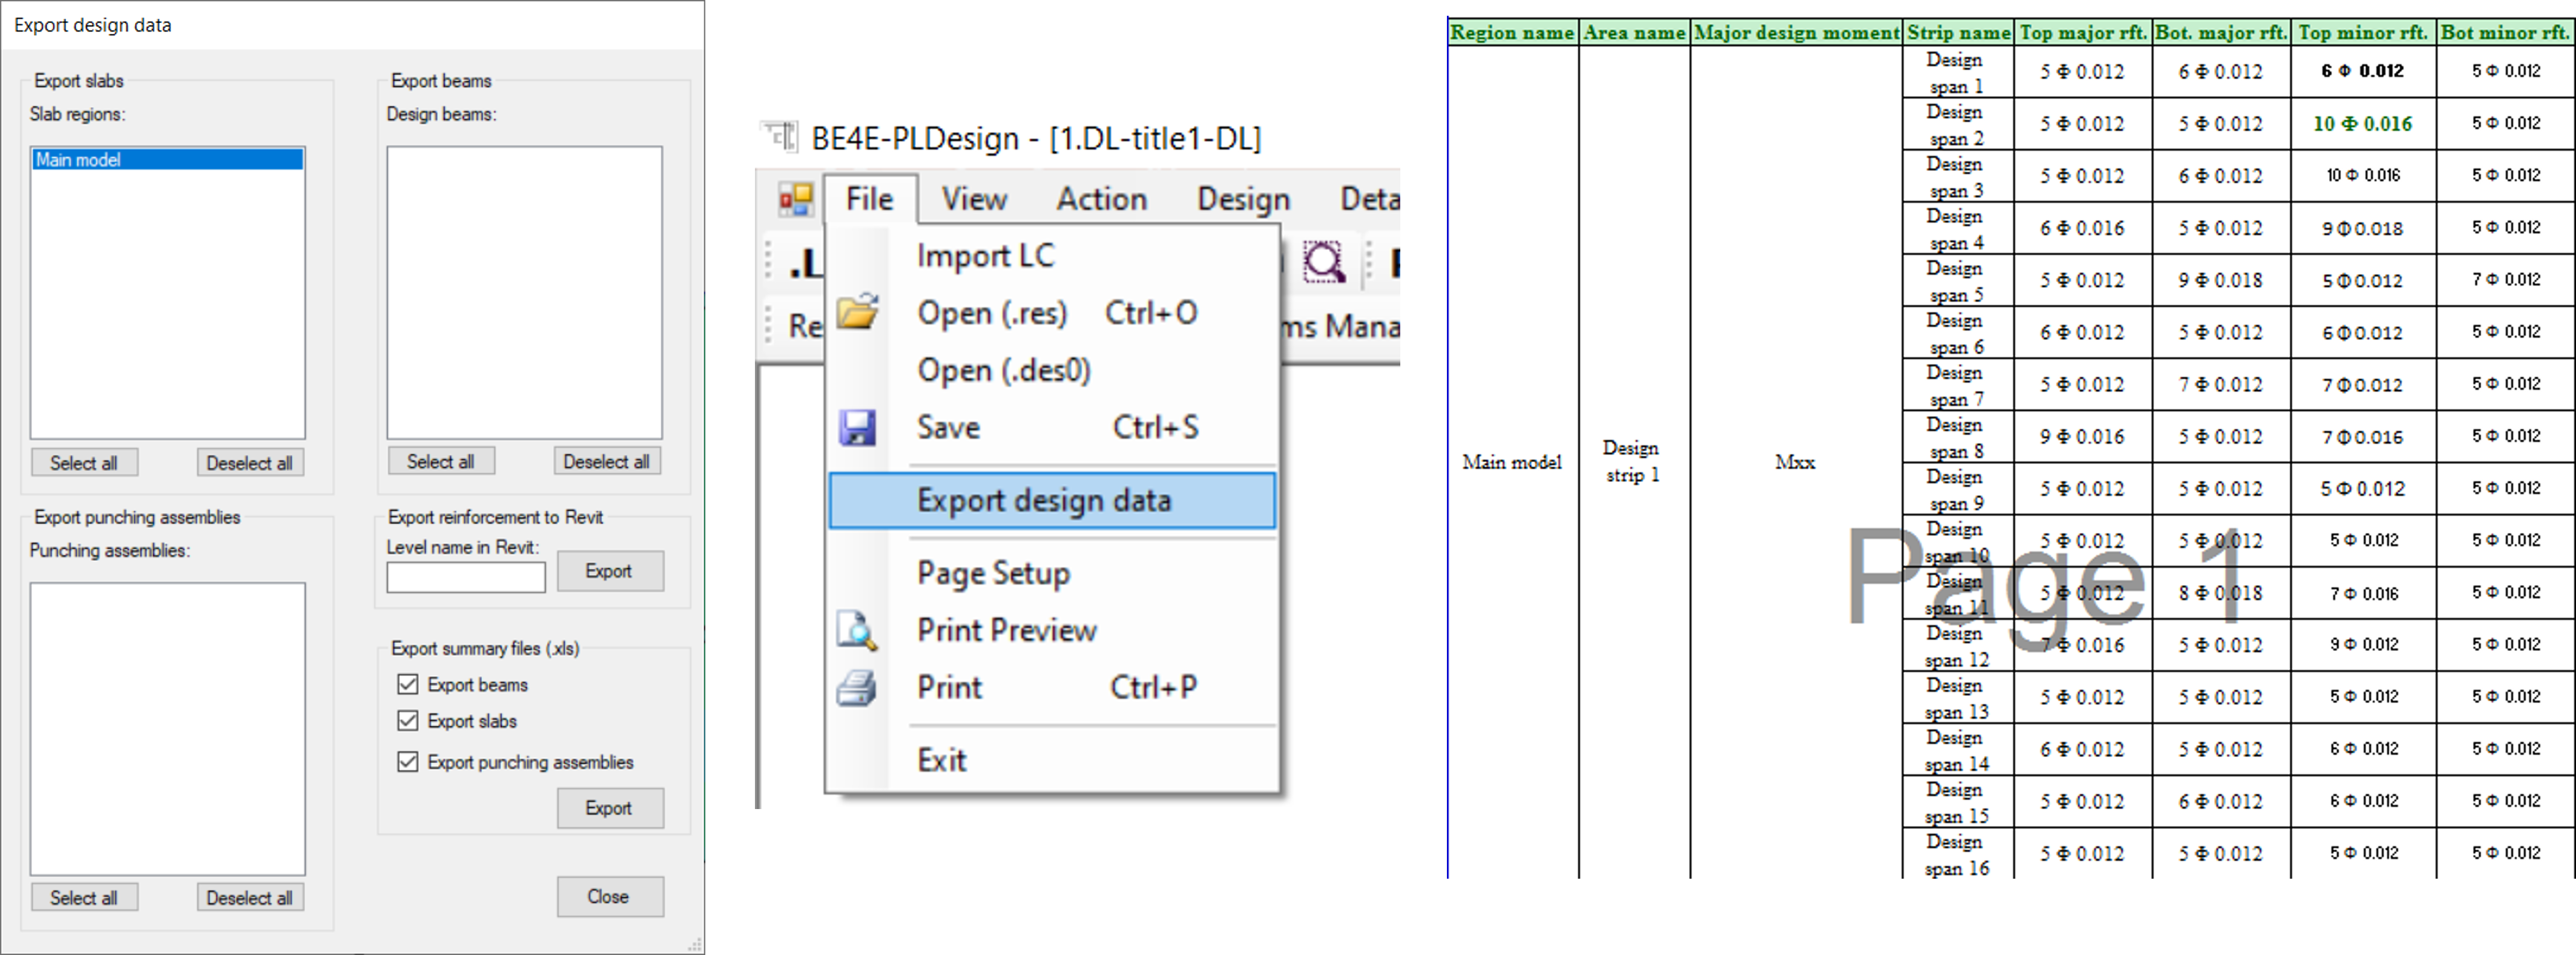 Exporting design data from PLPAK to Revit, CAD, or Excel